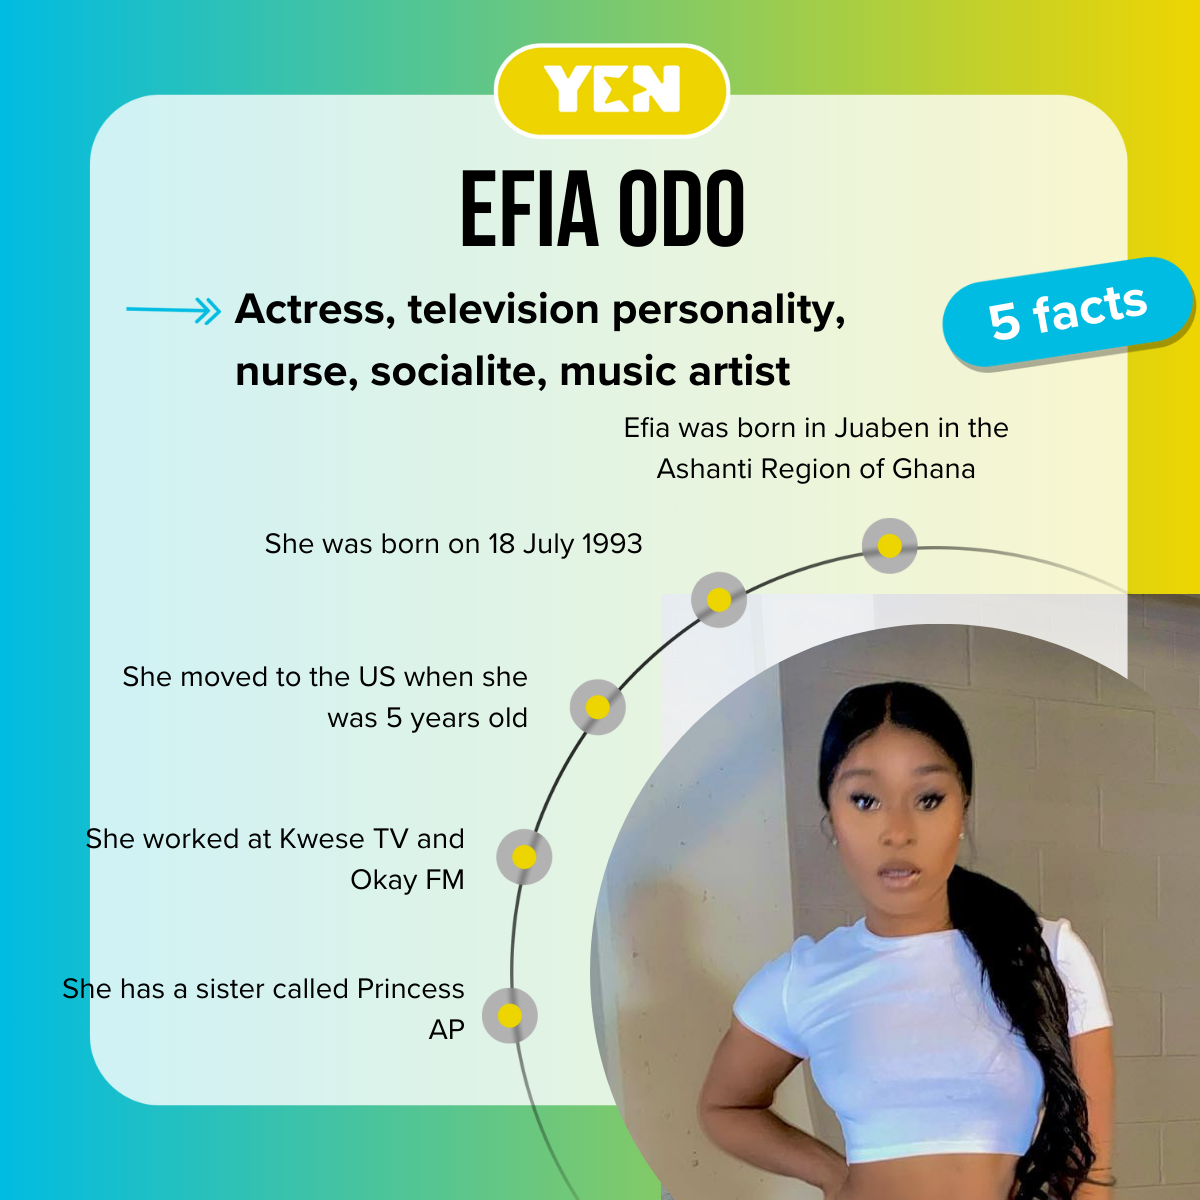 Facts about Efia Odo